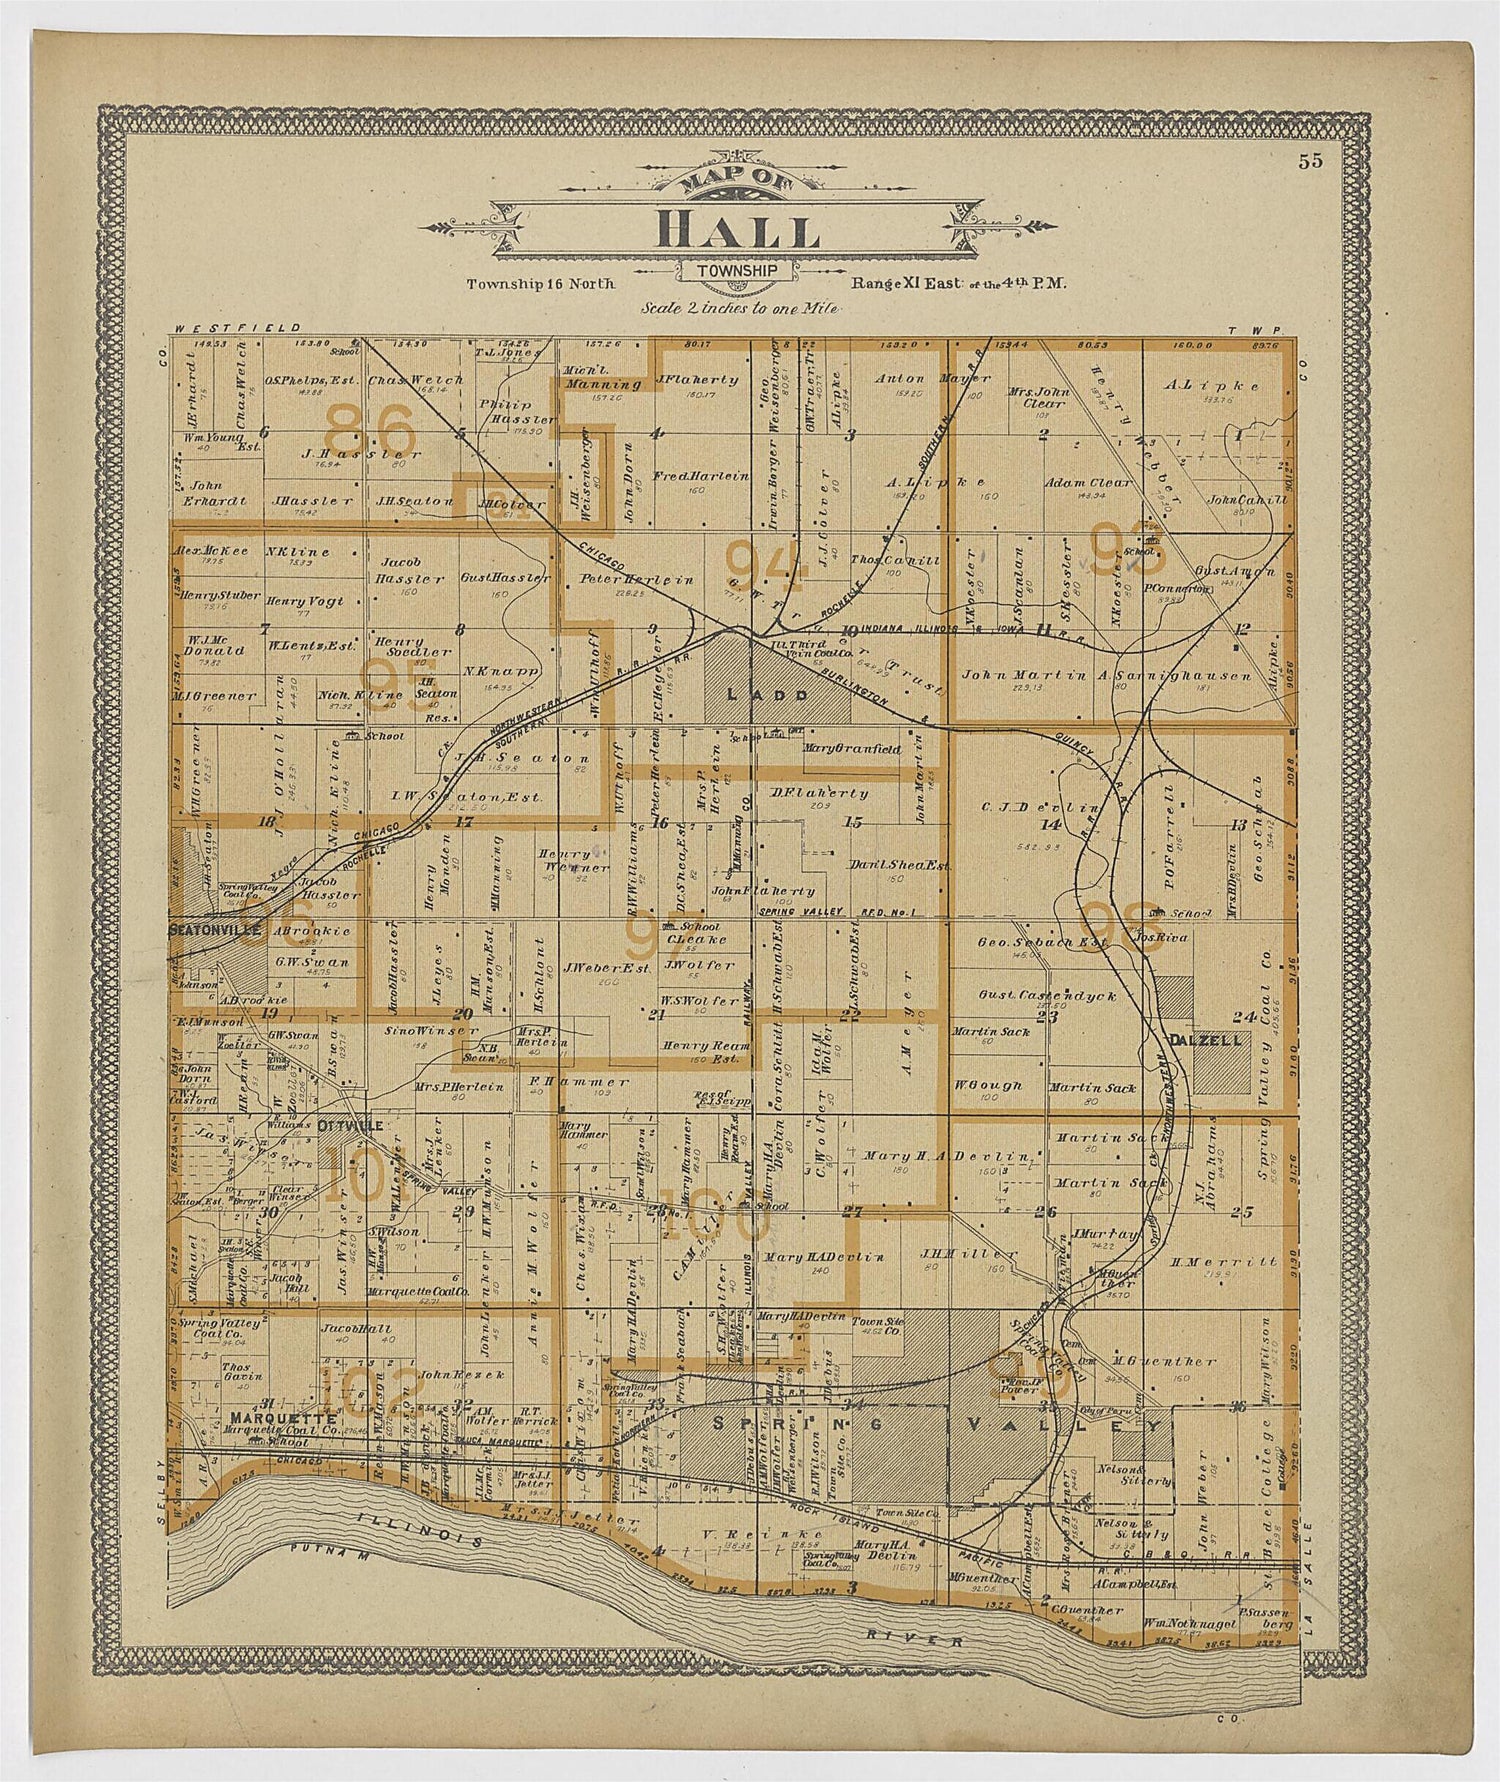 This old map of Image 31 of 20th Century Atlas of Bureau County, Illinois from Atlas of Bureau County, Illinois from 1905 was created by  Middle-West Publishing Co in 1905